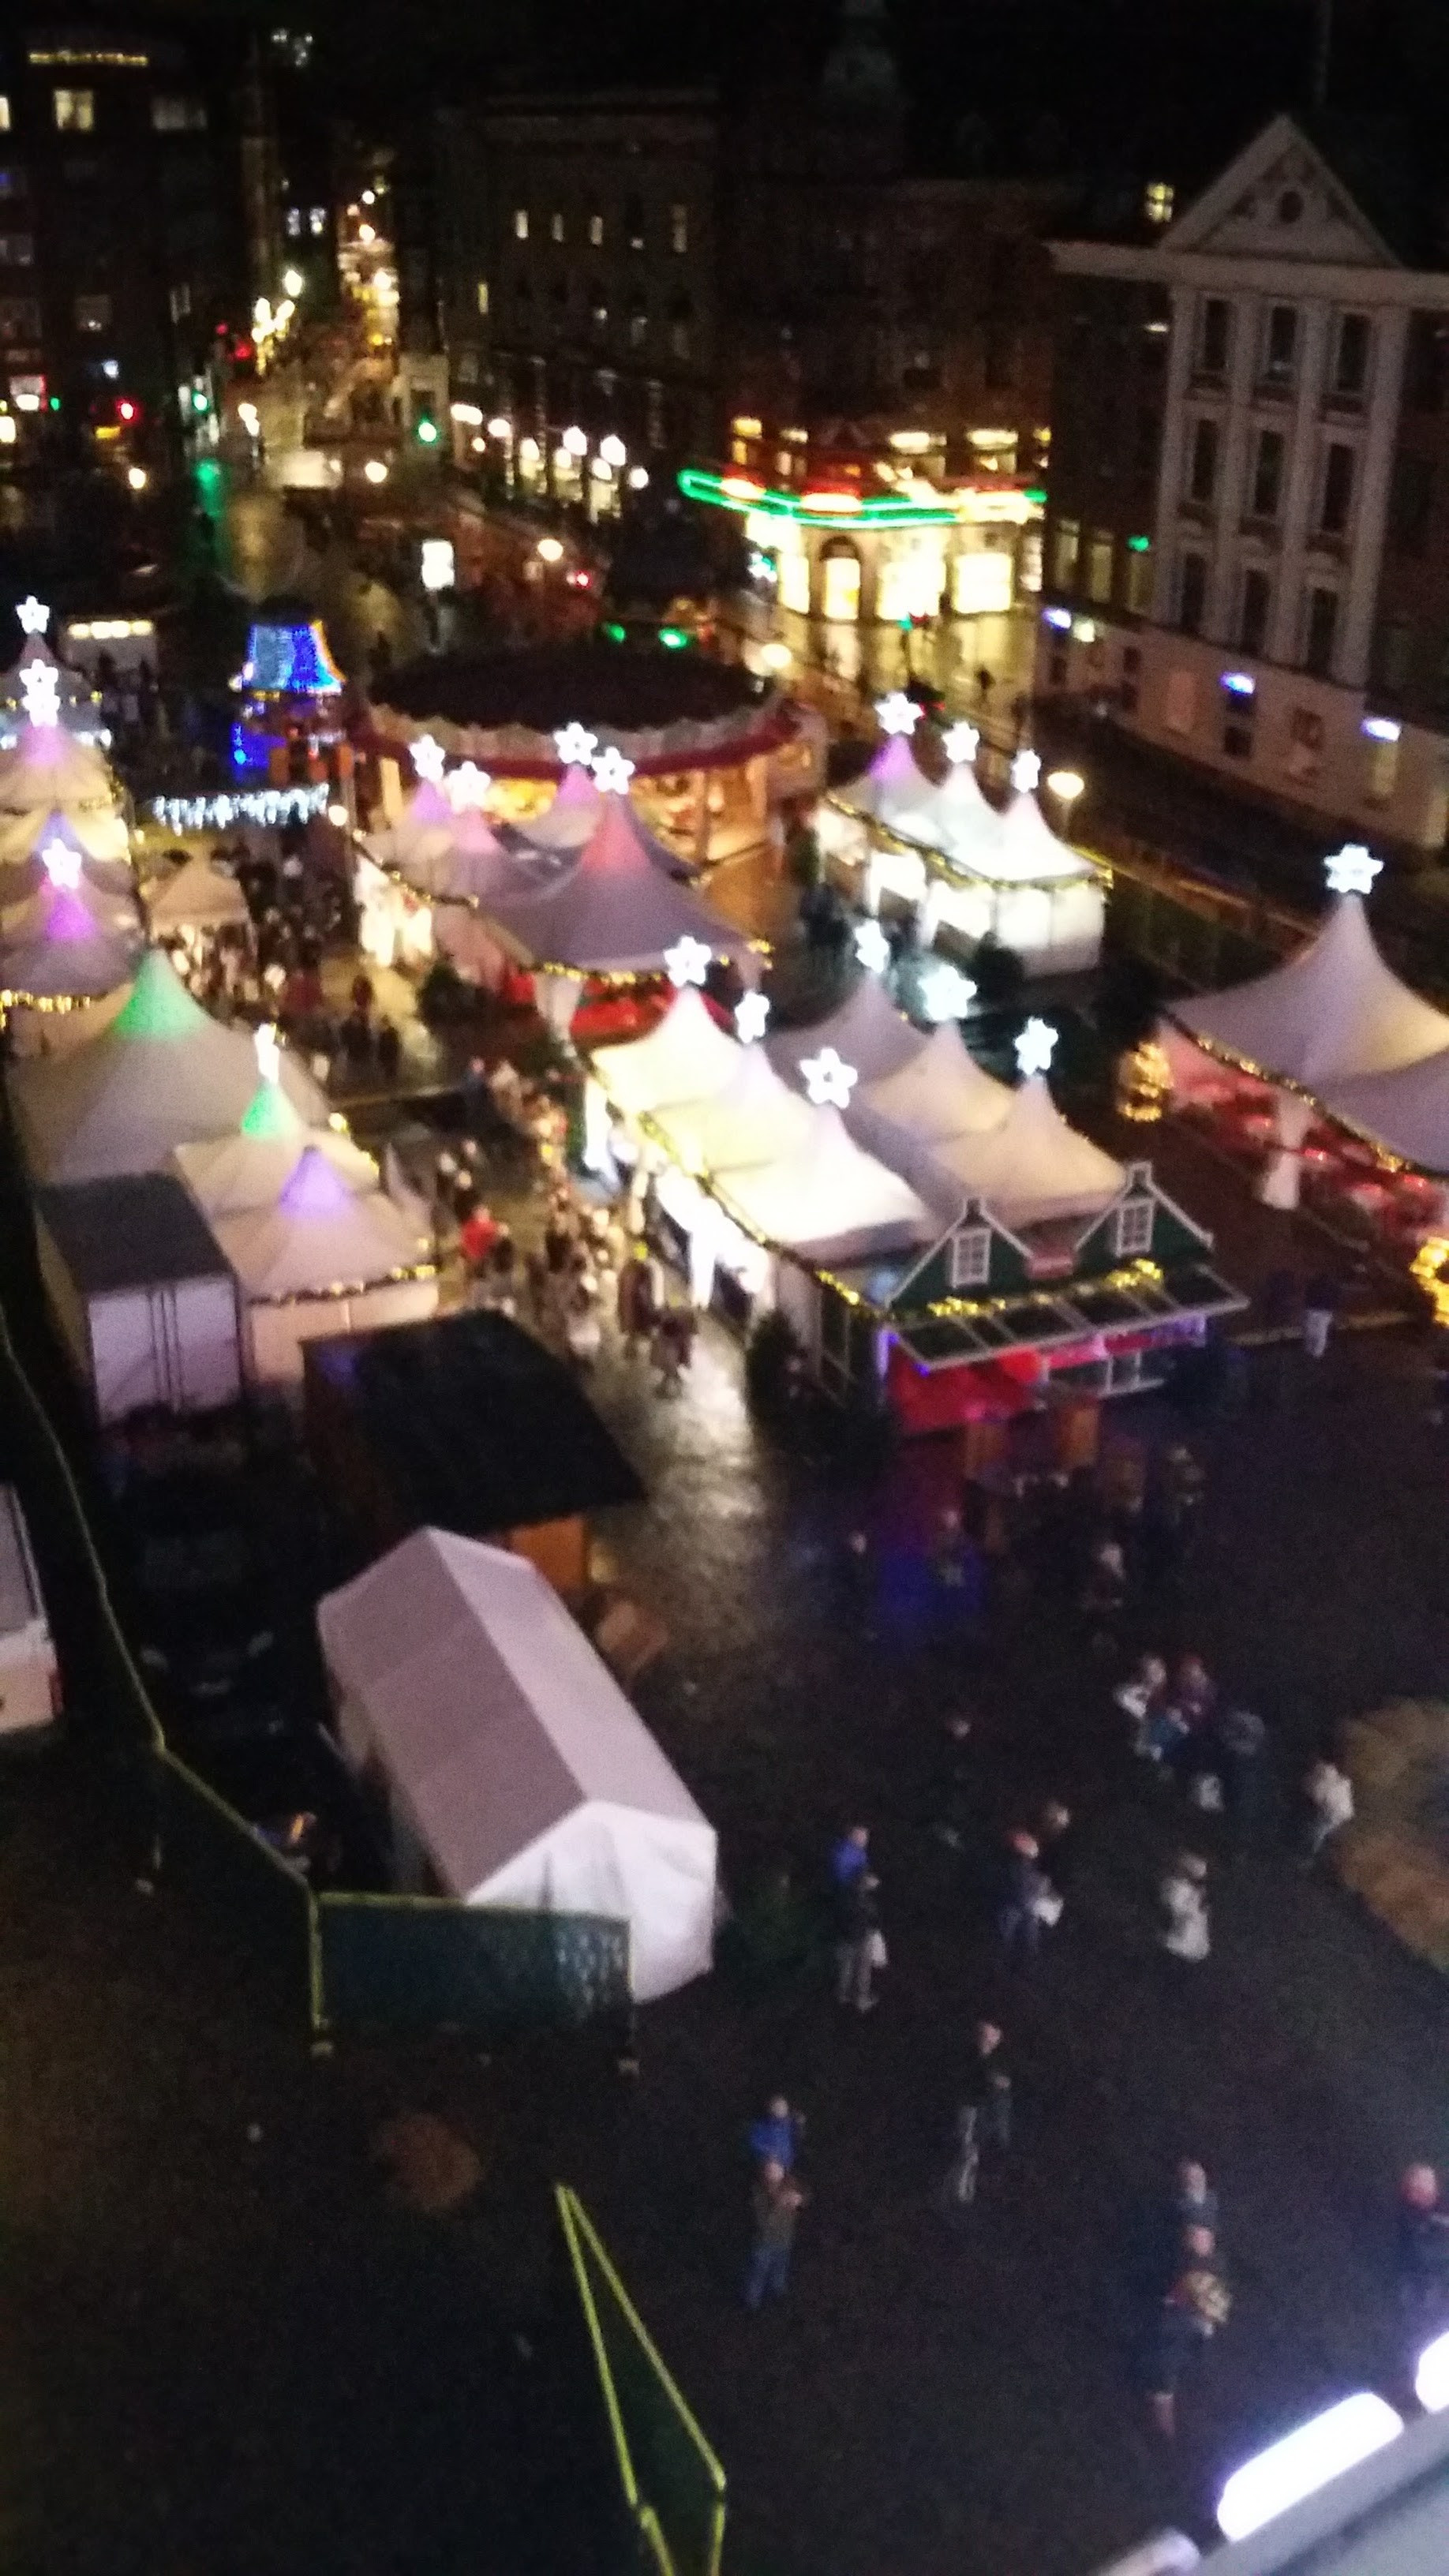 Looking down on the xmas markets from the top of the ferris wheel, Copenhagen 